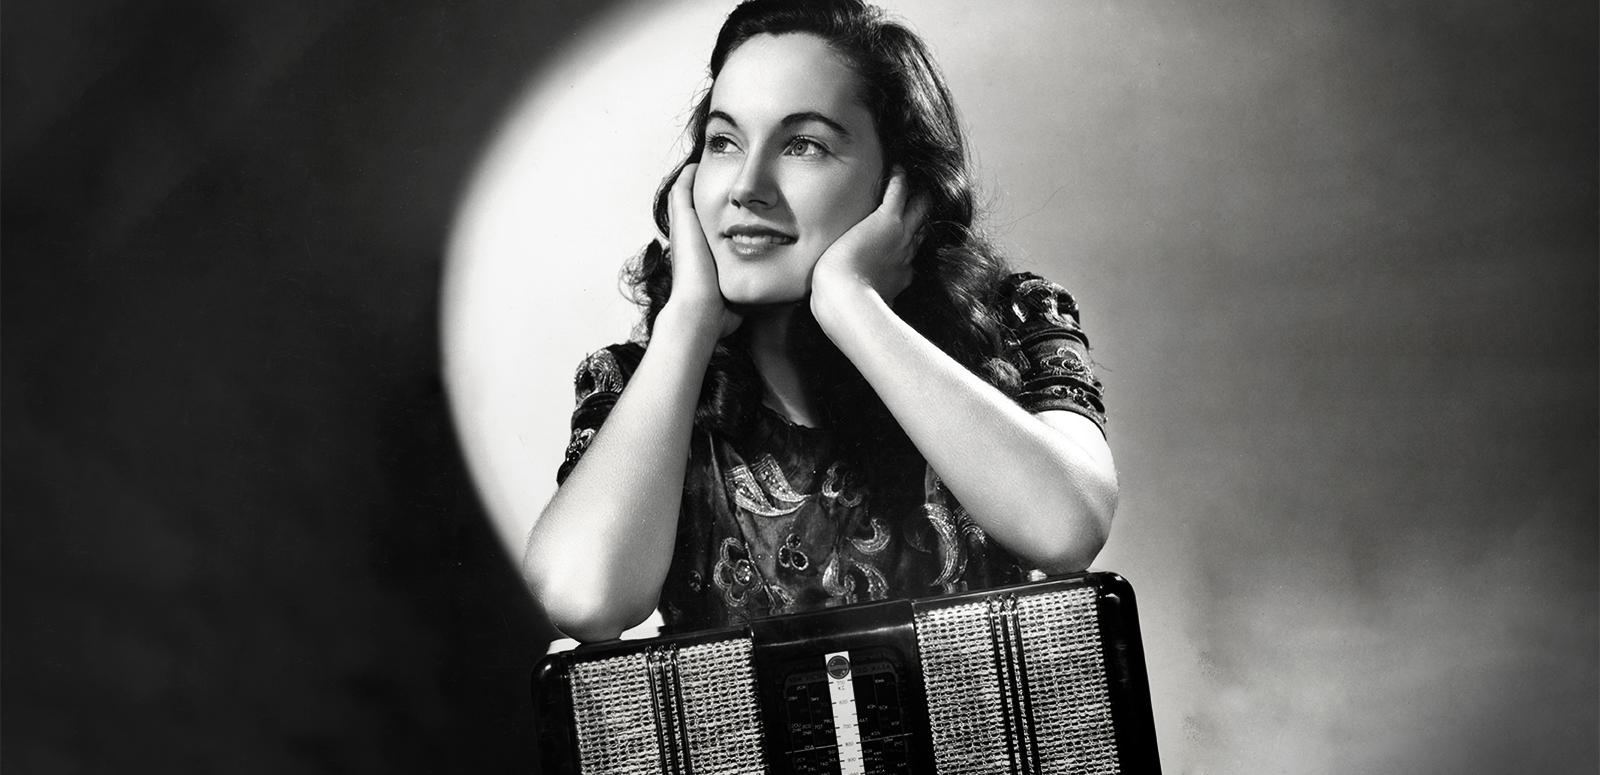 Black and white portrait of actress Betty Bryant wit her elbows resting on a piano accordian and her face in her hands.